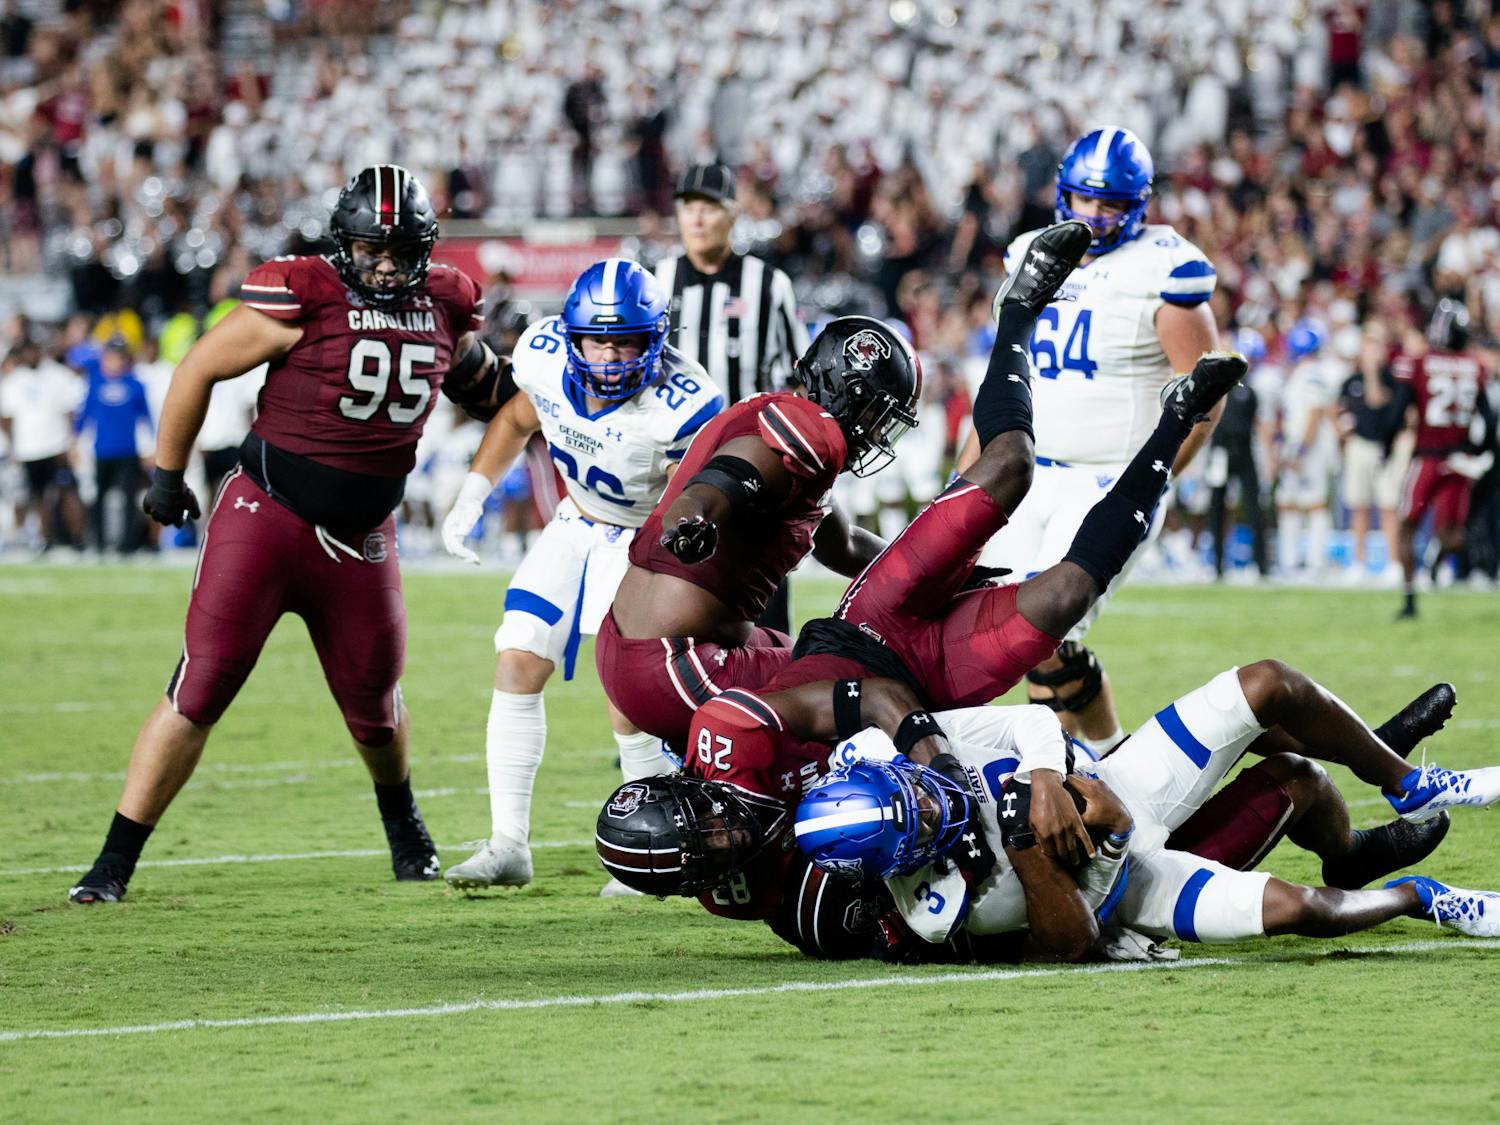 Redshirt senior defensive back Darius Rush tackles his opponent during a game against Georgia State on Sept. 3, 2022. The Gamecocks won 35-14.&nbsp;